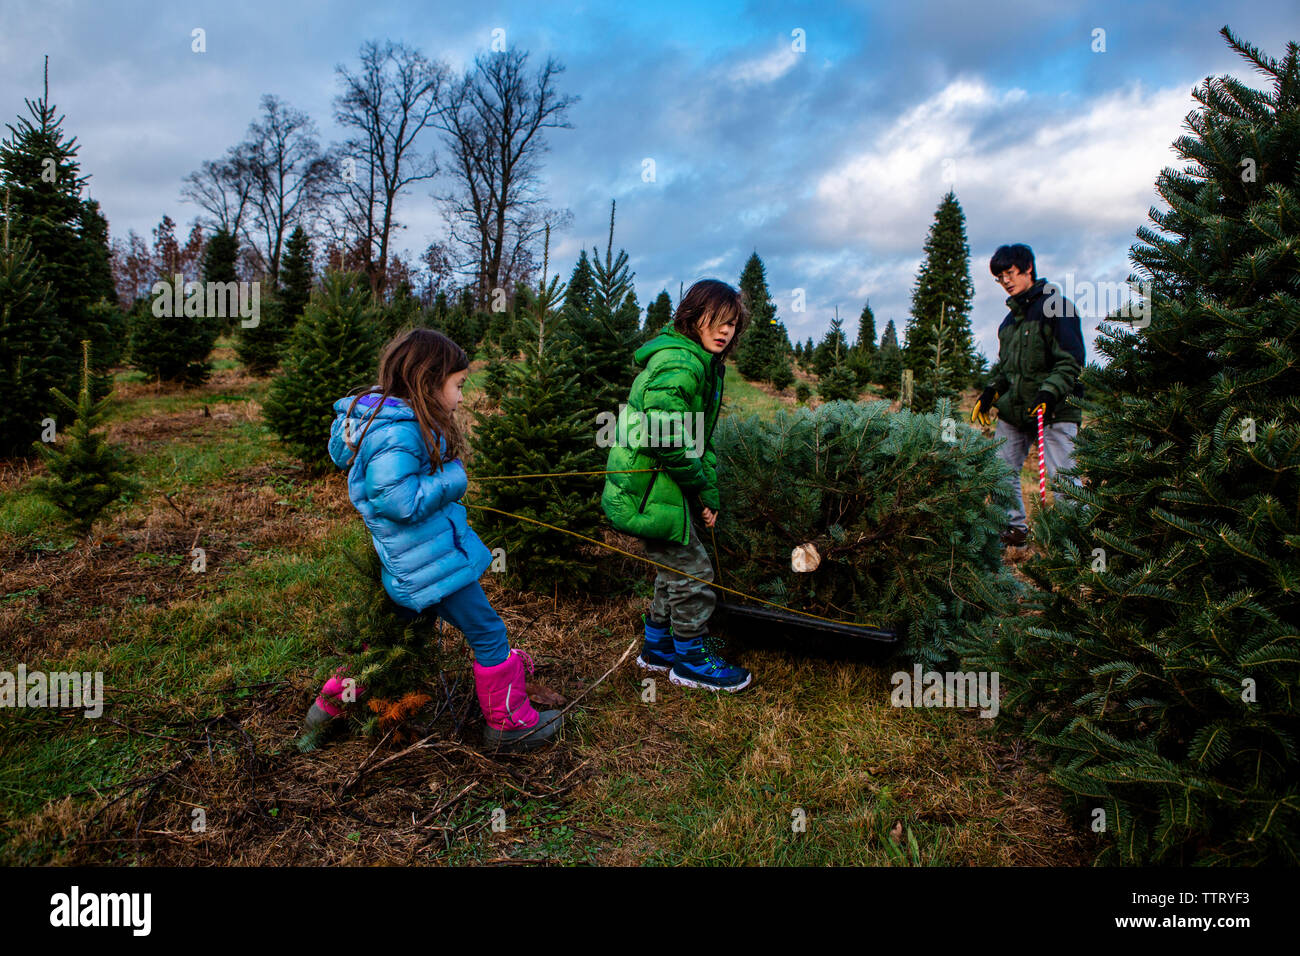 Children with father dragging pine tree in sled against cloudy sky at farm Stock Photo